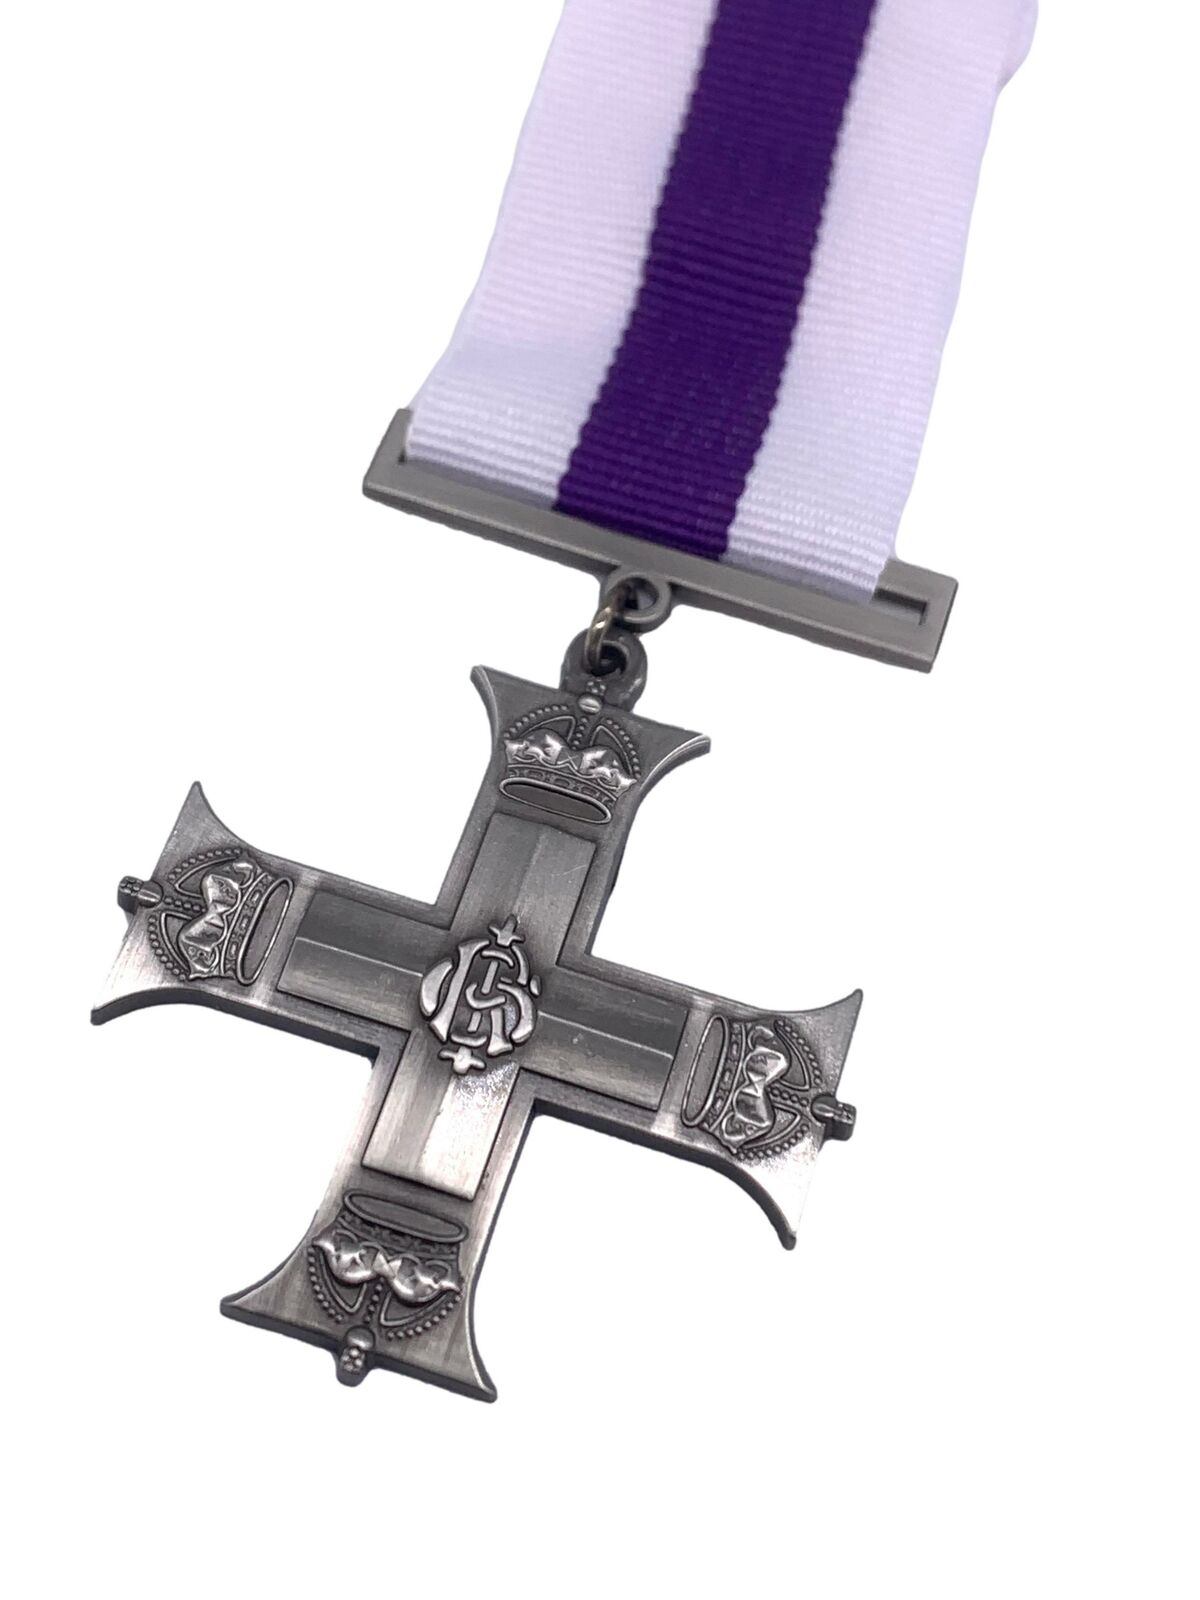 Replica Military Cross (MC), British Forces, Brand New Copy/Reproduction